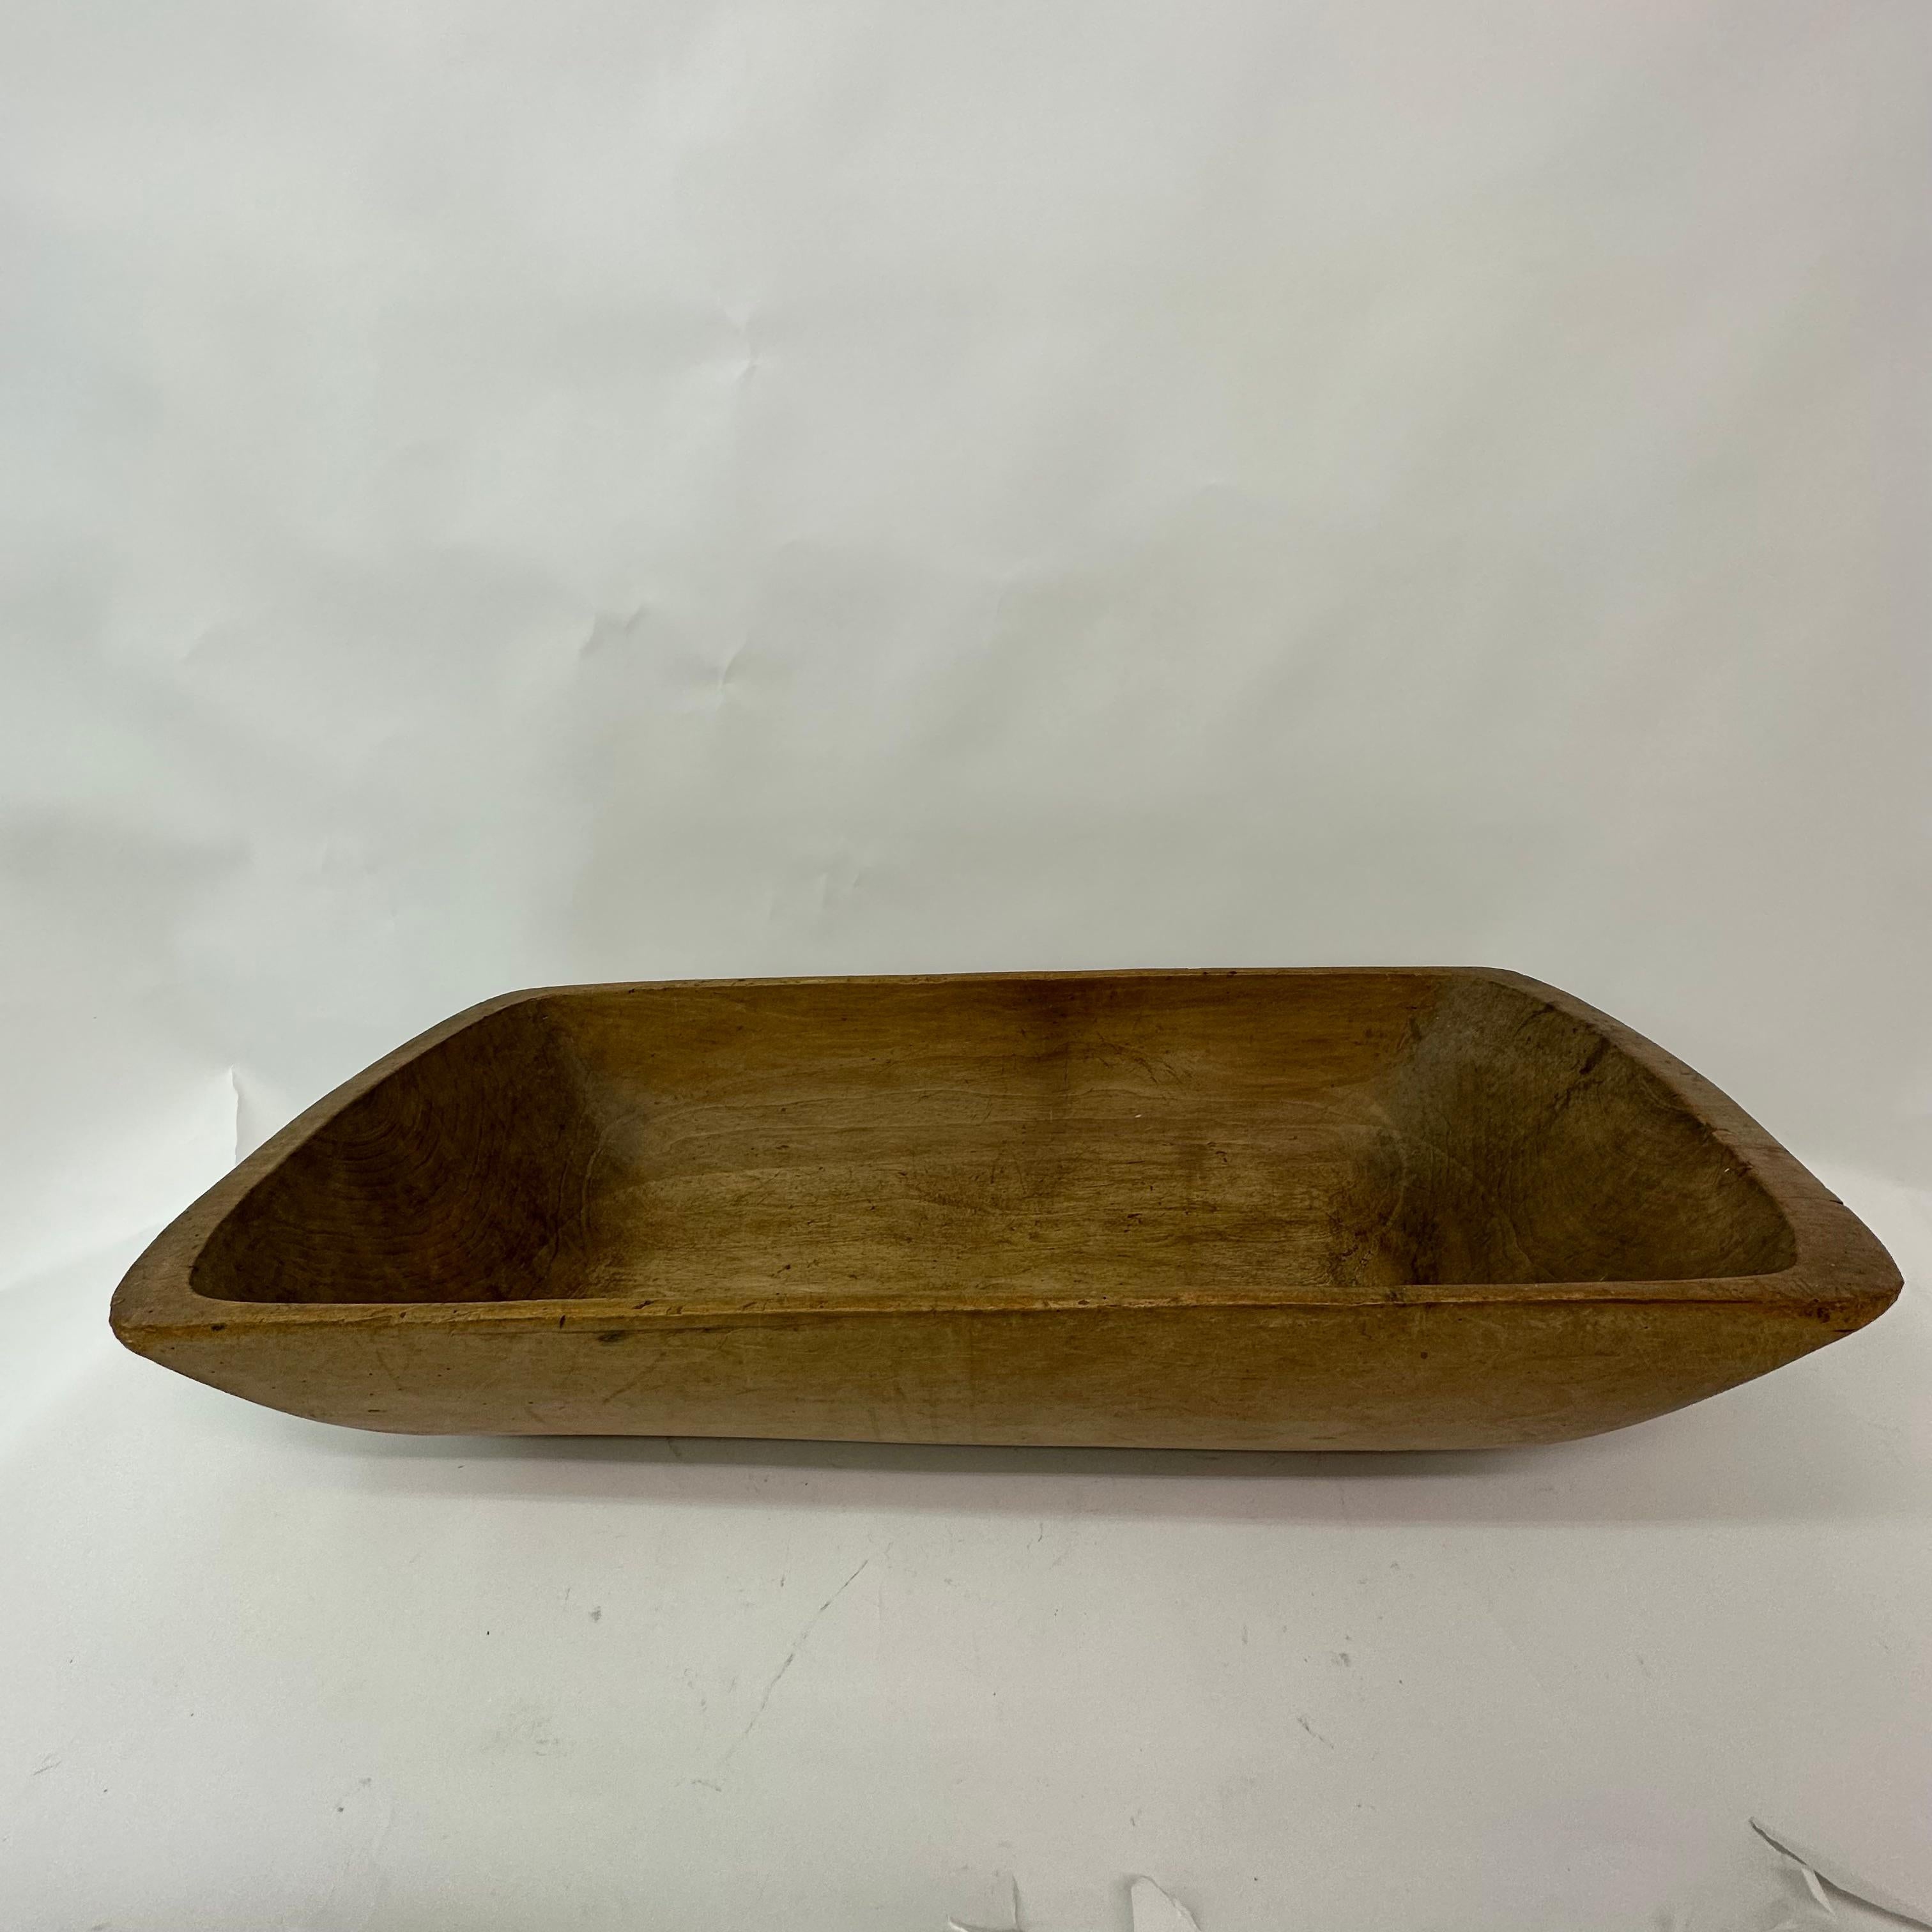 Antique wooden dough trough in unrestored, untreated original condition. A beautiful home decoration that can be used in many different ways.
Dimensions: 101cm W, 45cm D, 21cm H
Period: 1900
Material: Wood
Condition: Good